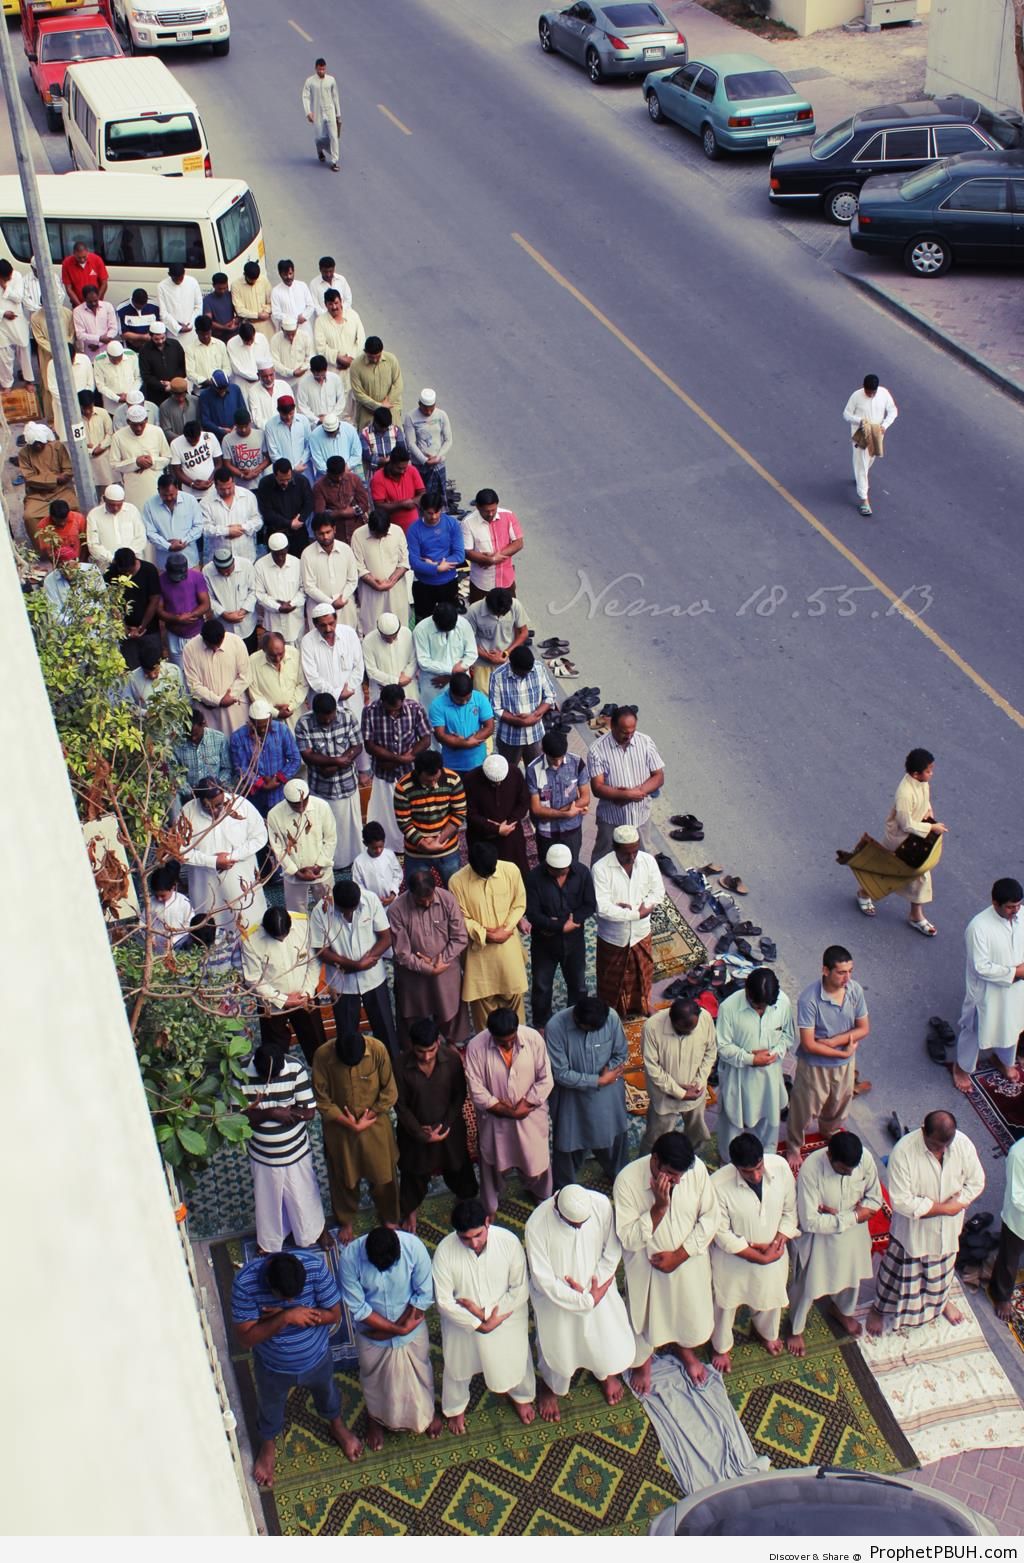 Friday Prayers on the Street - Drawings 